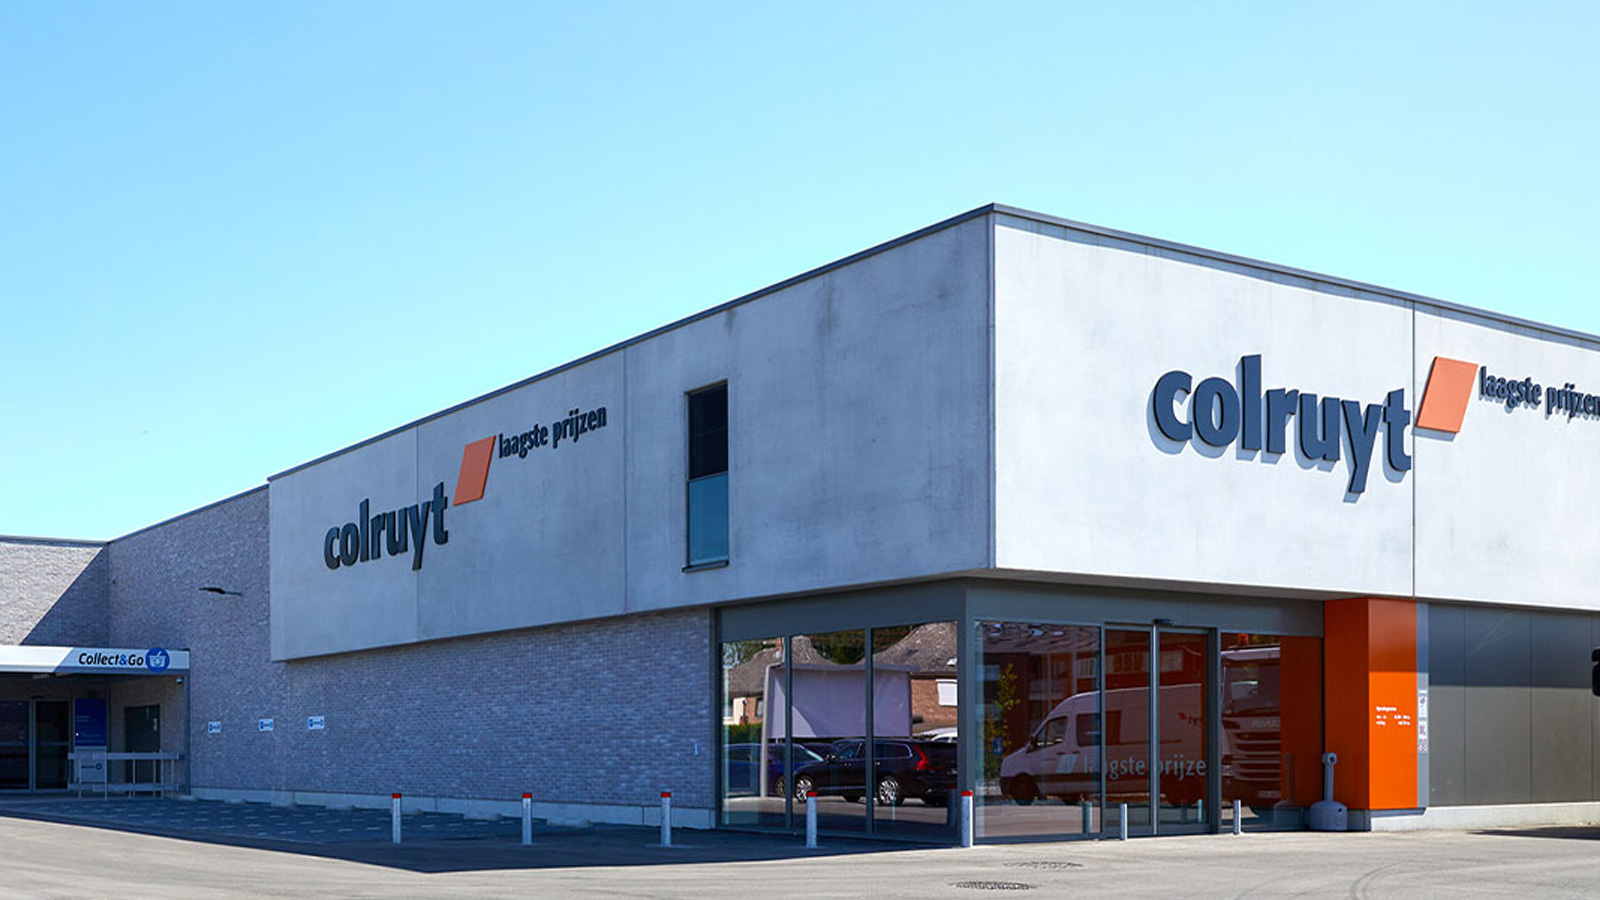 Case Solita and Colryut: How data travel faster and better between suppliers and retailers